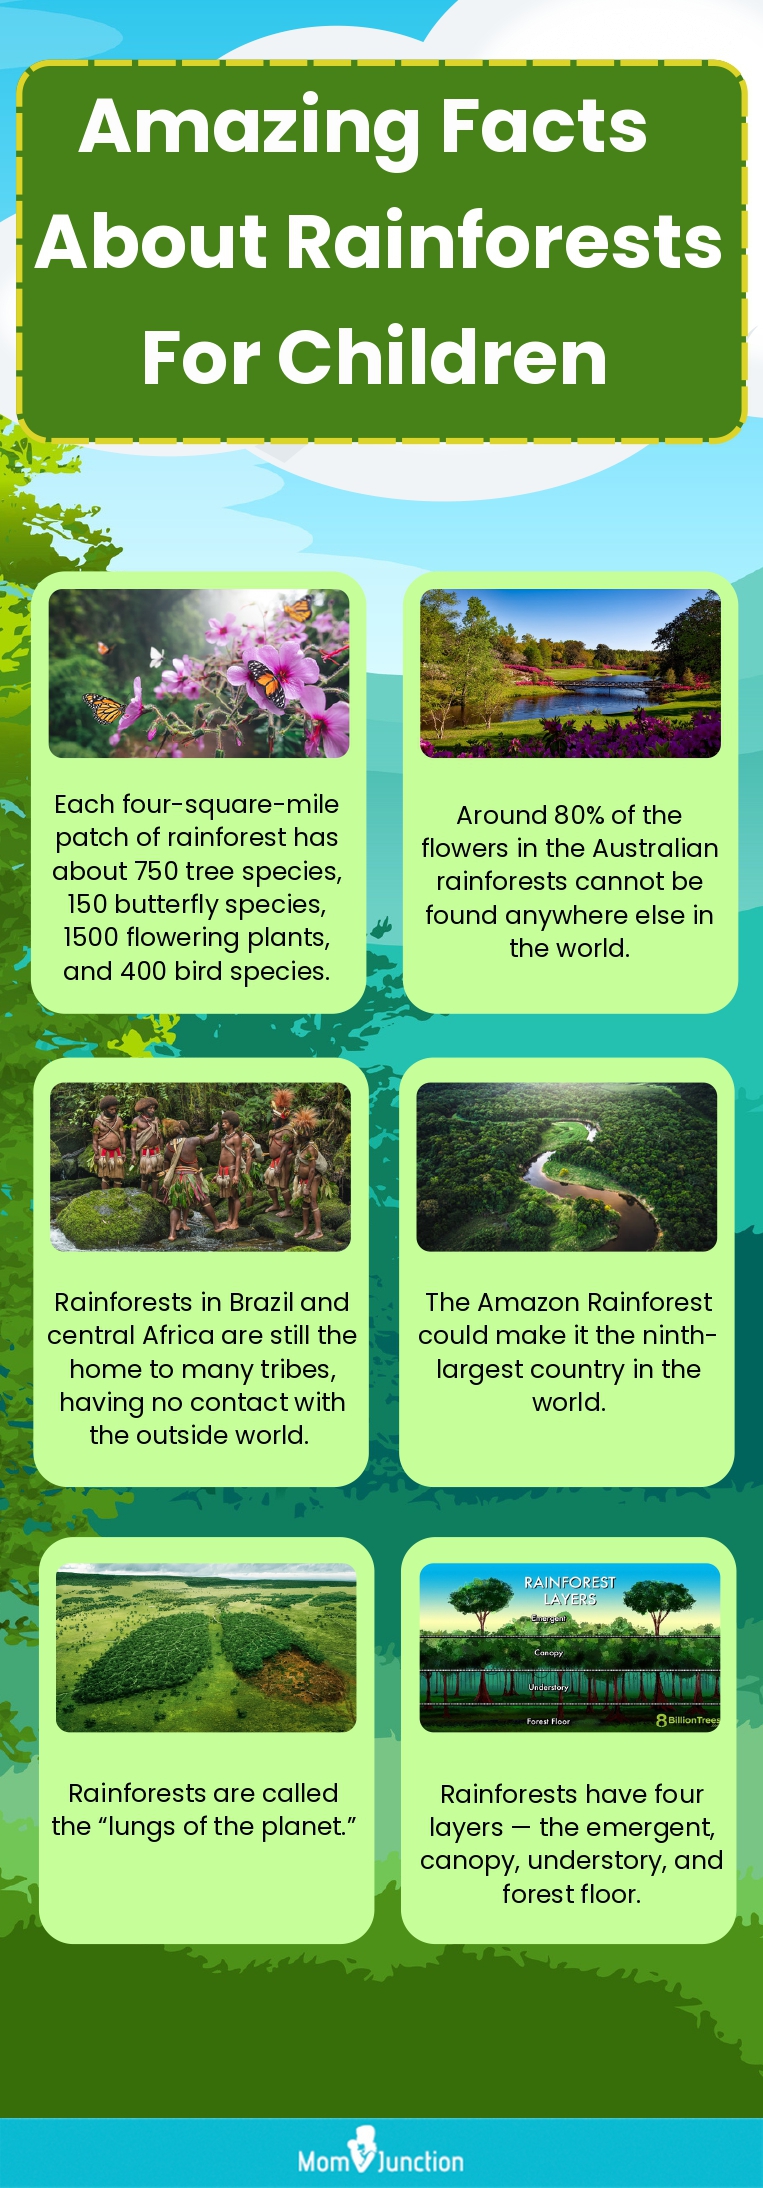 amazing facts about rainforests for children (infographic)